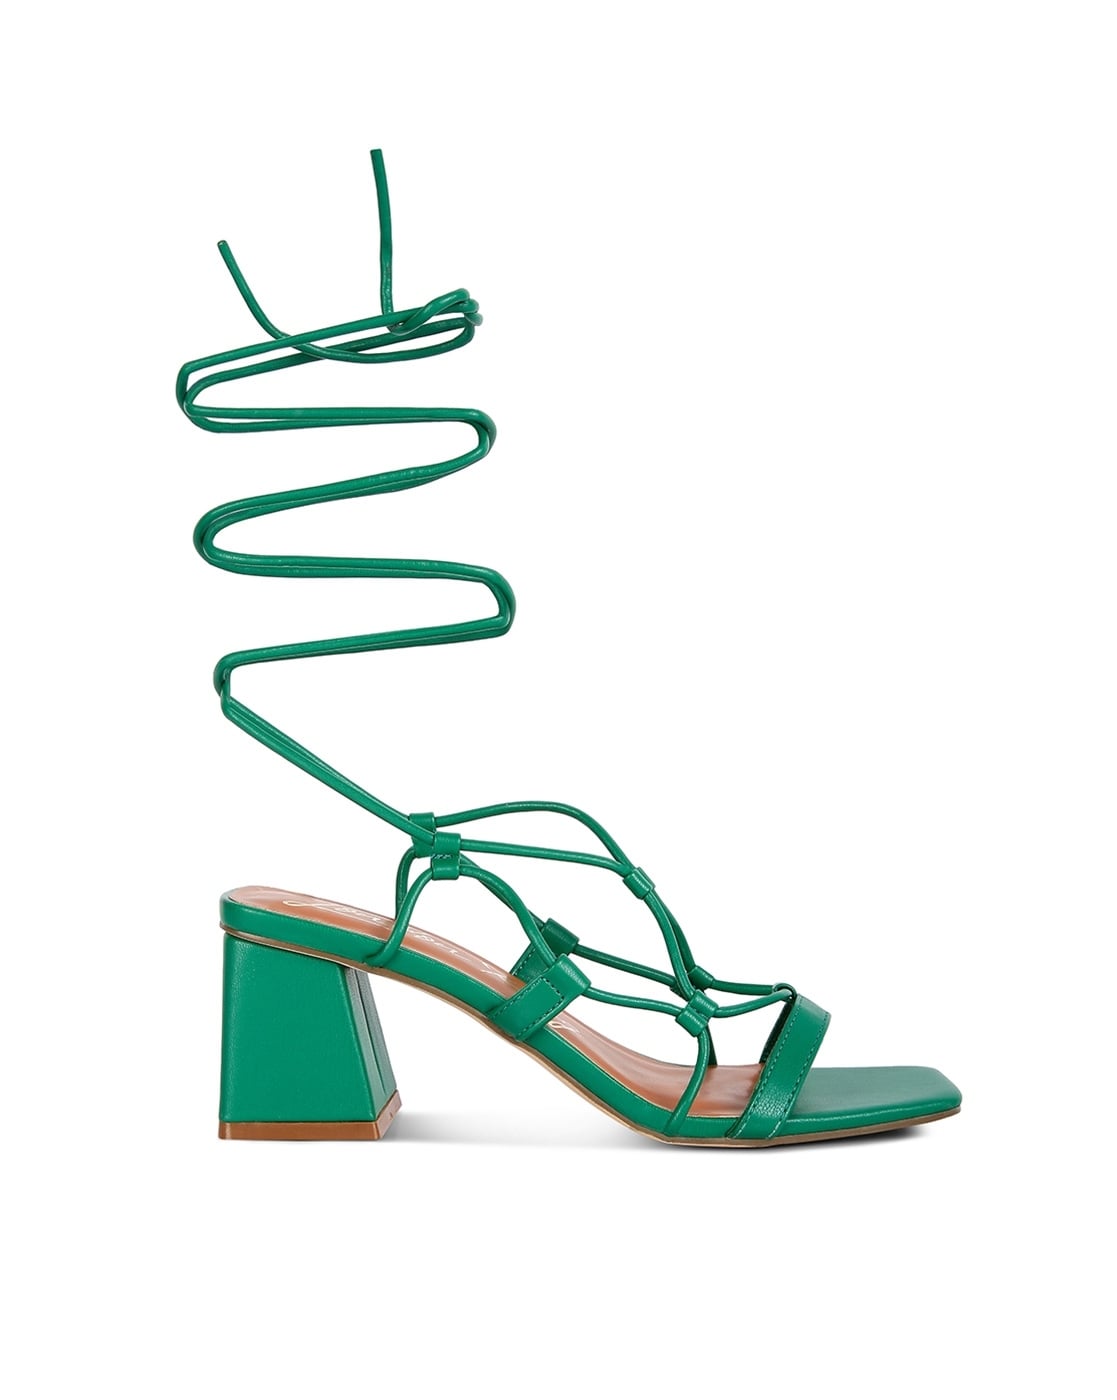 Shopping List: Strappy Lace-up Sandals | Preview.ph